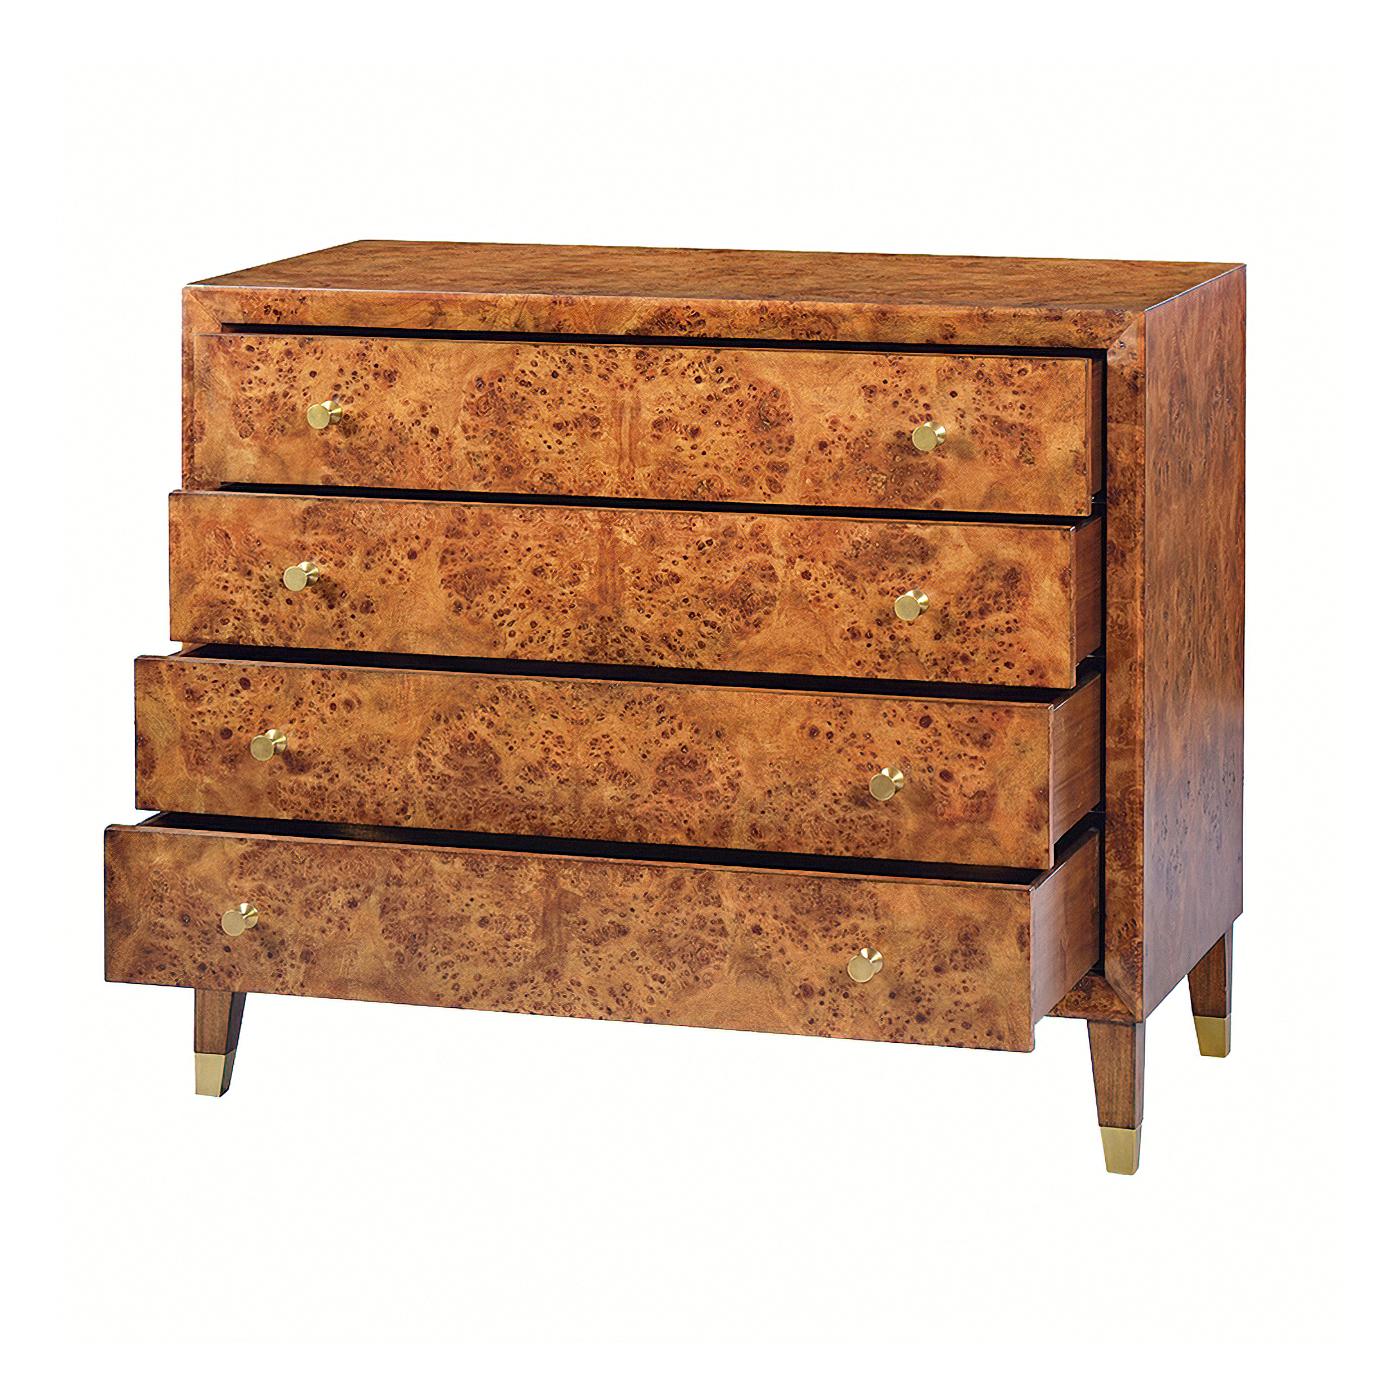 Mid-century style burl dresser with four drawers each with polished brass turned knobs with a hand rubbed warm brown finish with subtle distressing and raised on square tapered legs with brass caps.

Dimensions: 40